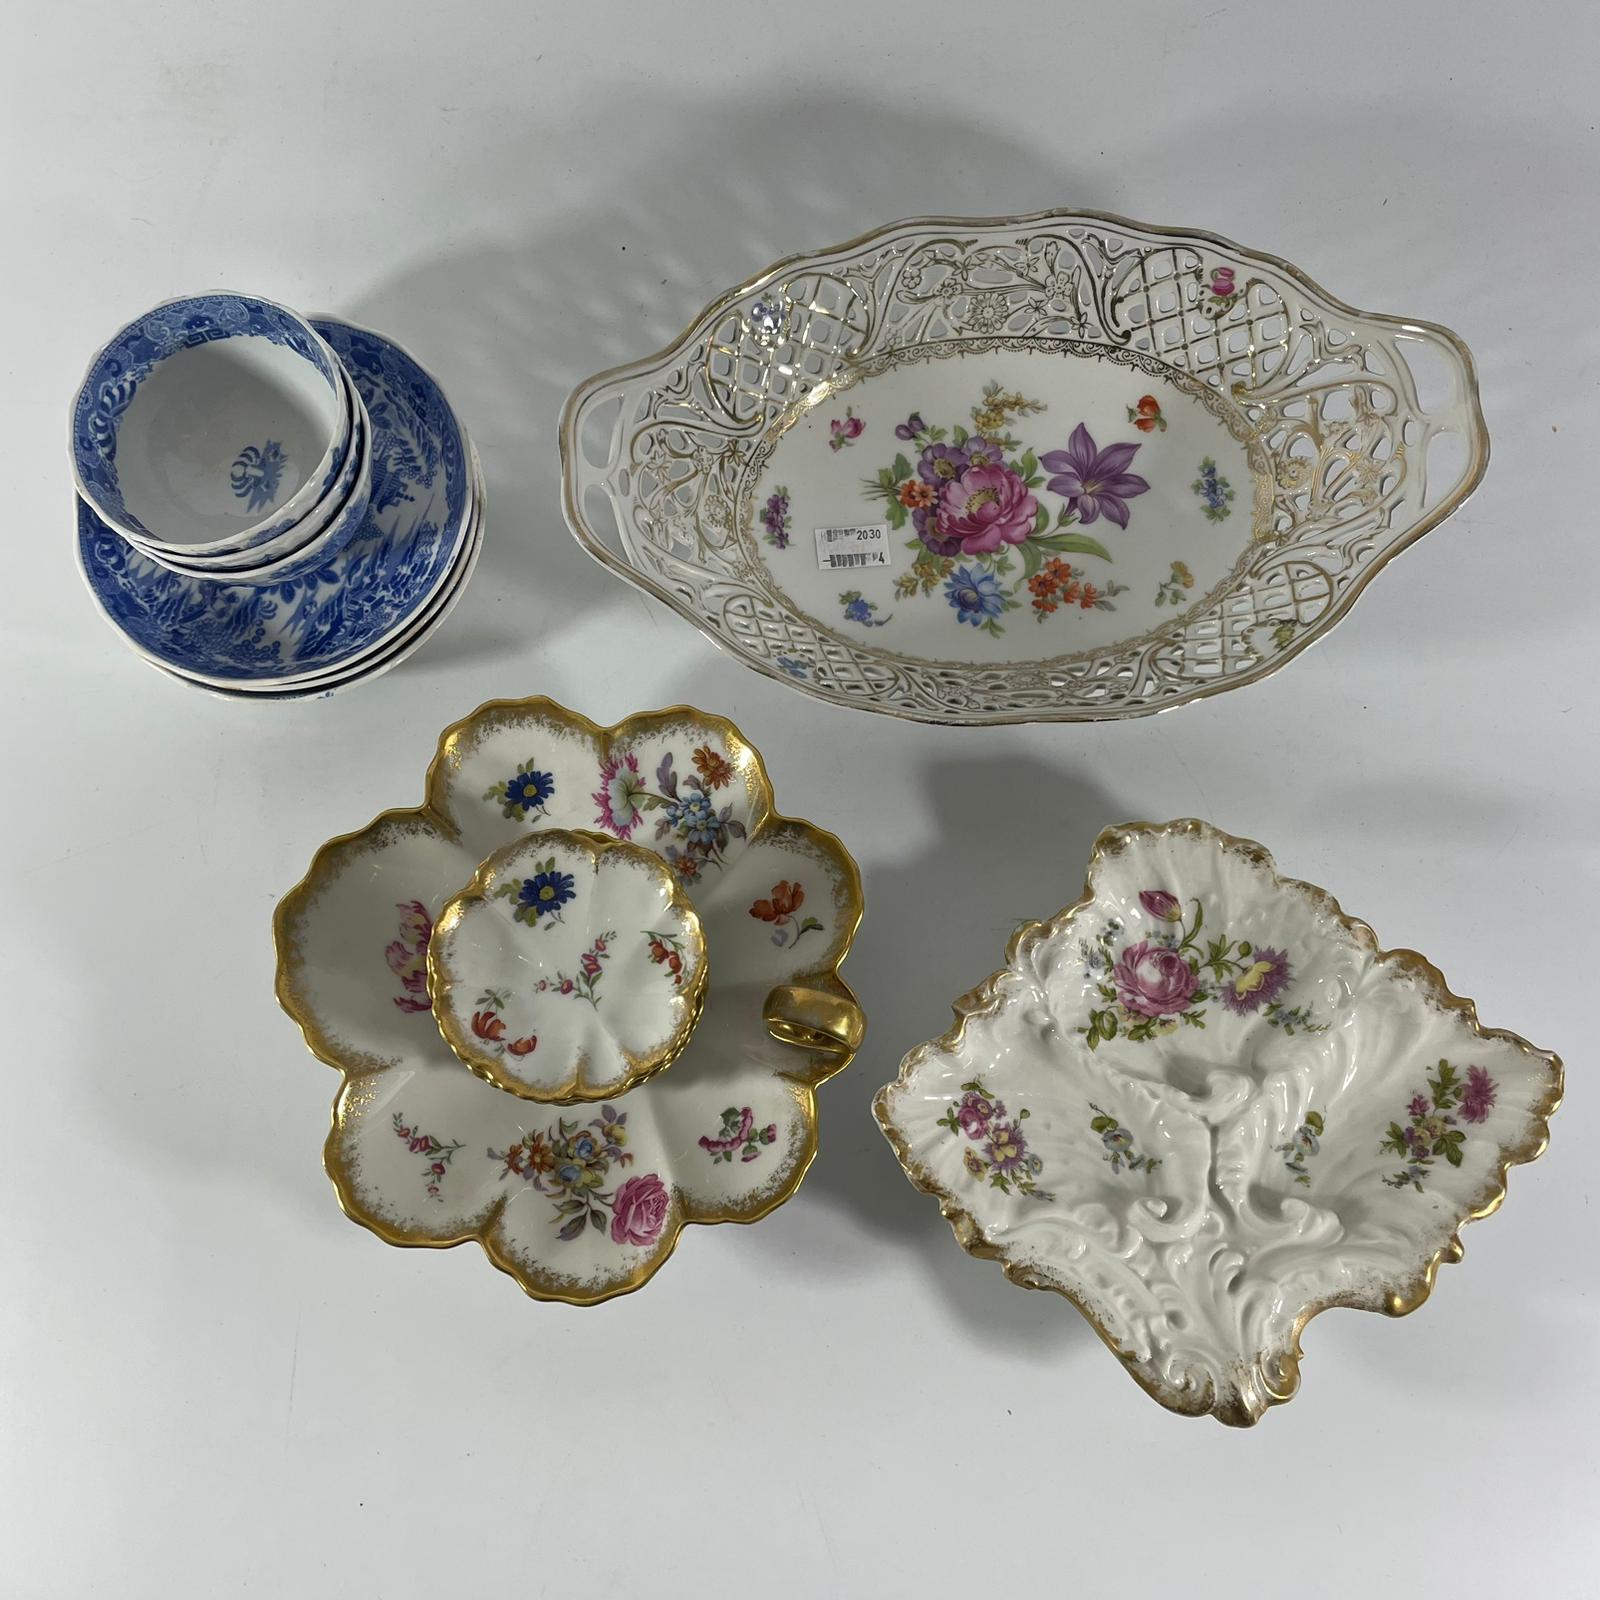 2 Limoge dishes (one chipped), 8 side dishes and a Dresden style pierced dish and 3 spode tea